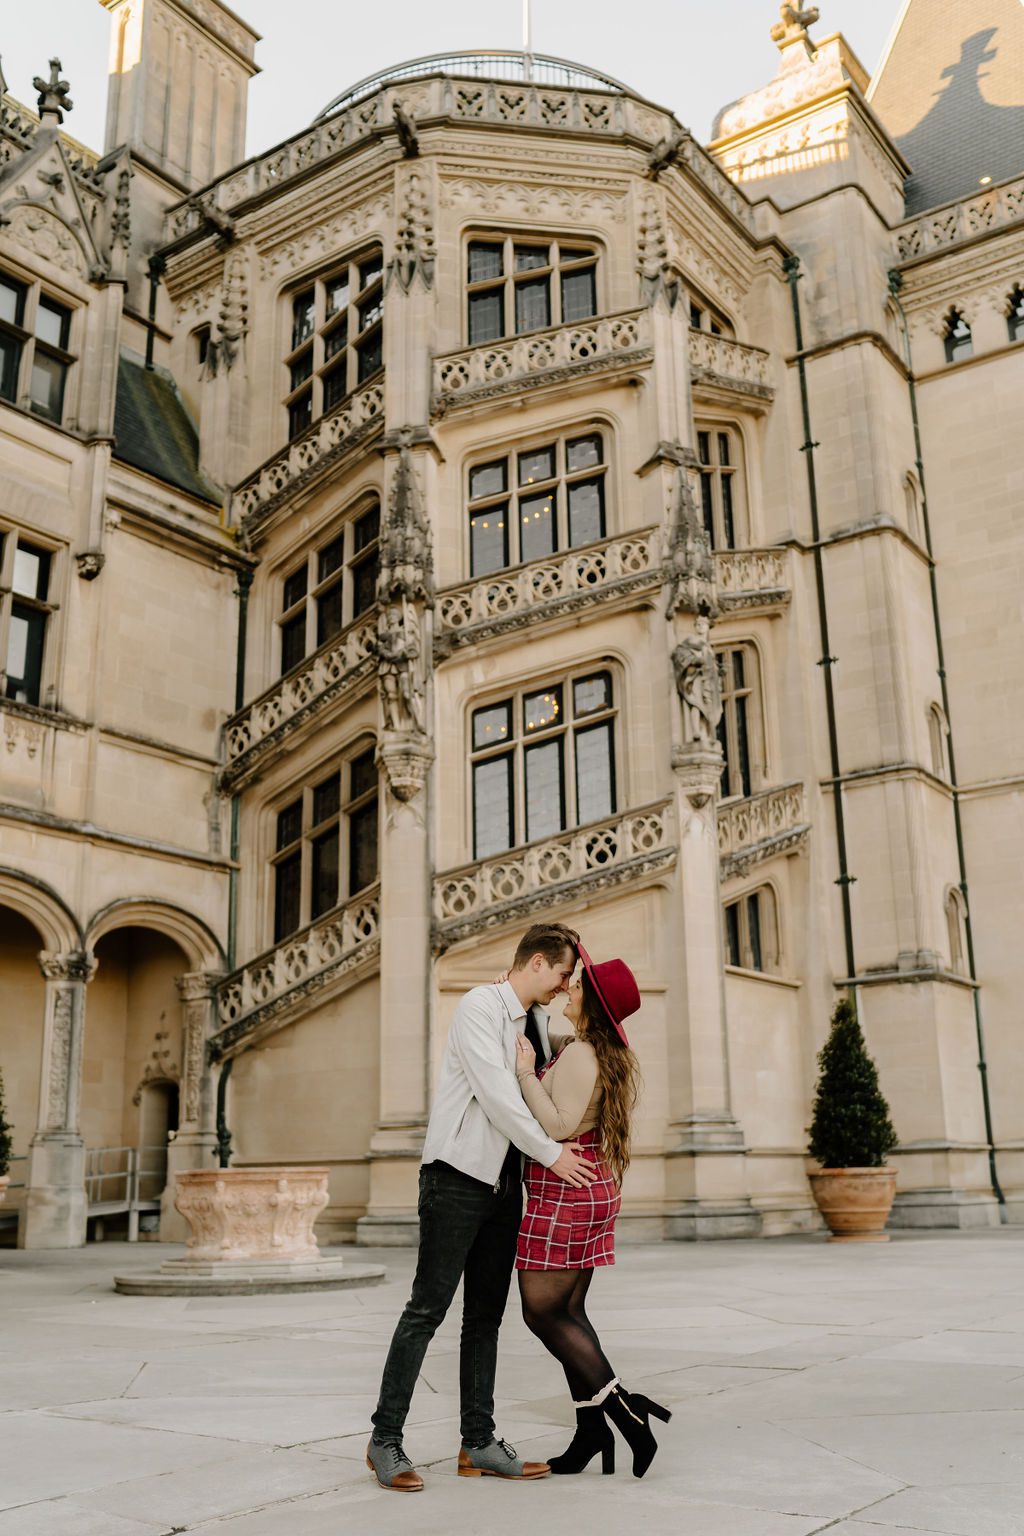 Fall Couples Pictures At The Biltmore Estate in Asheville, North Carolina